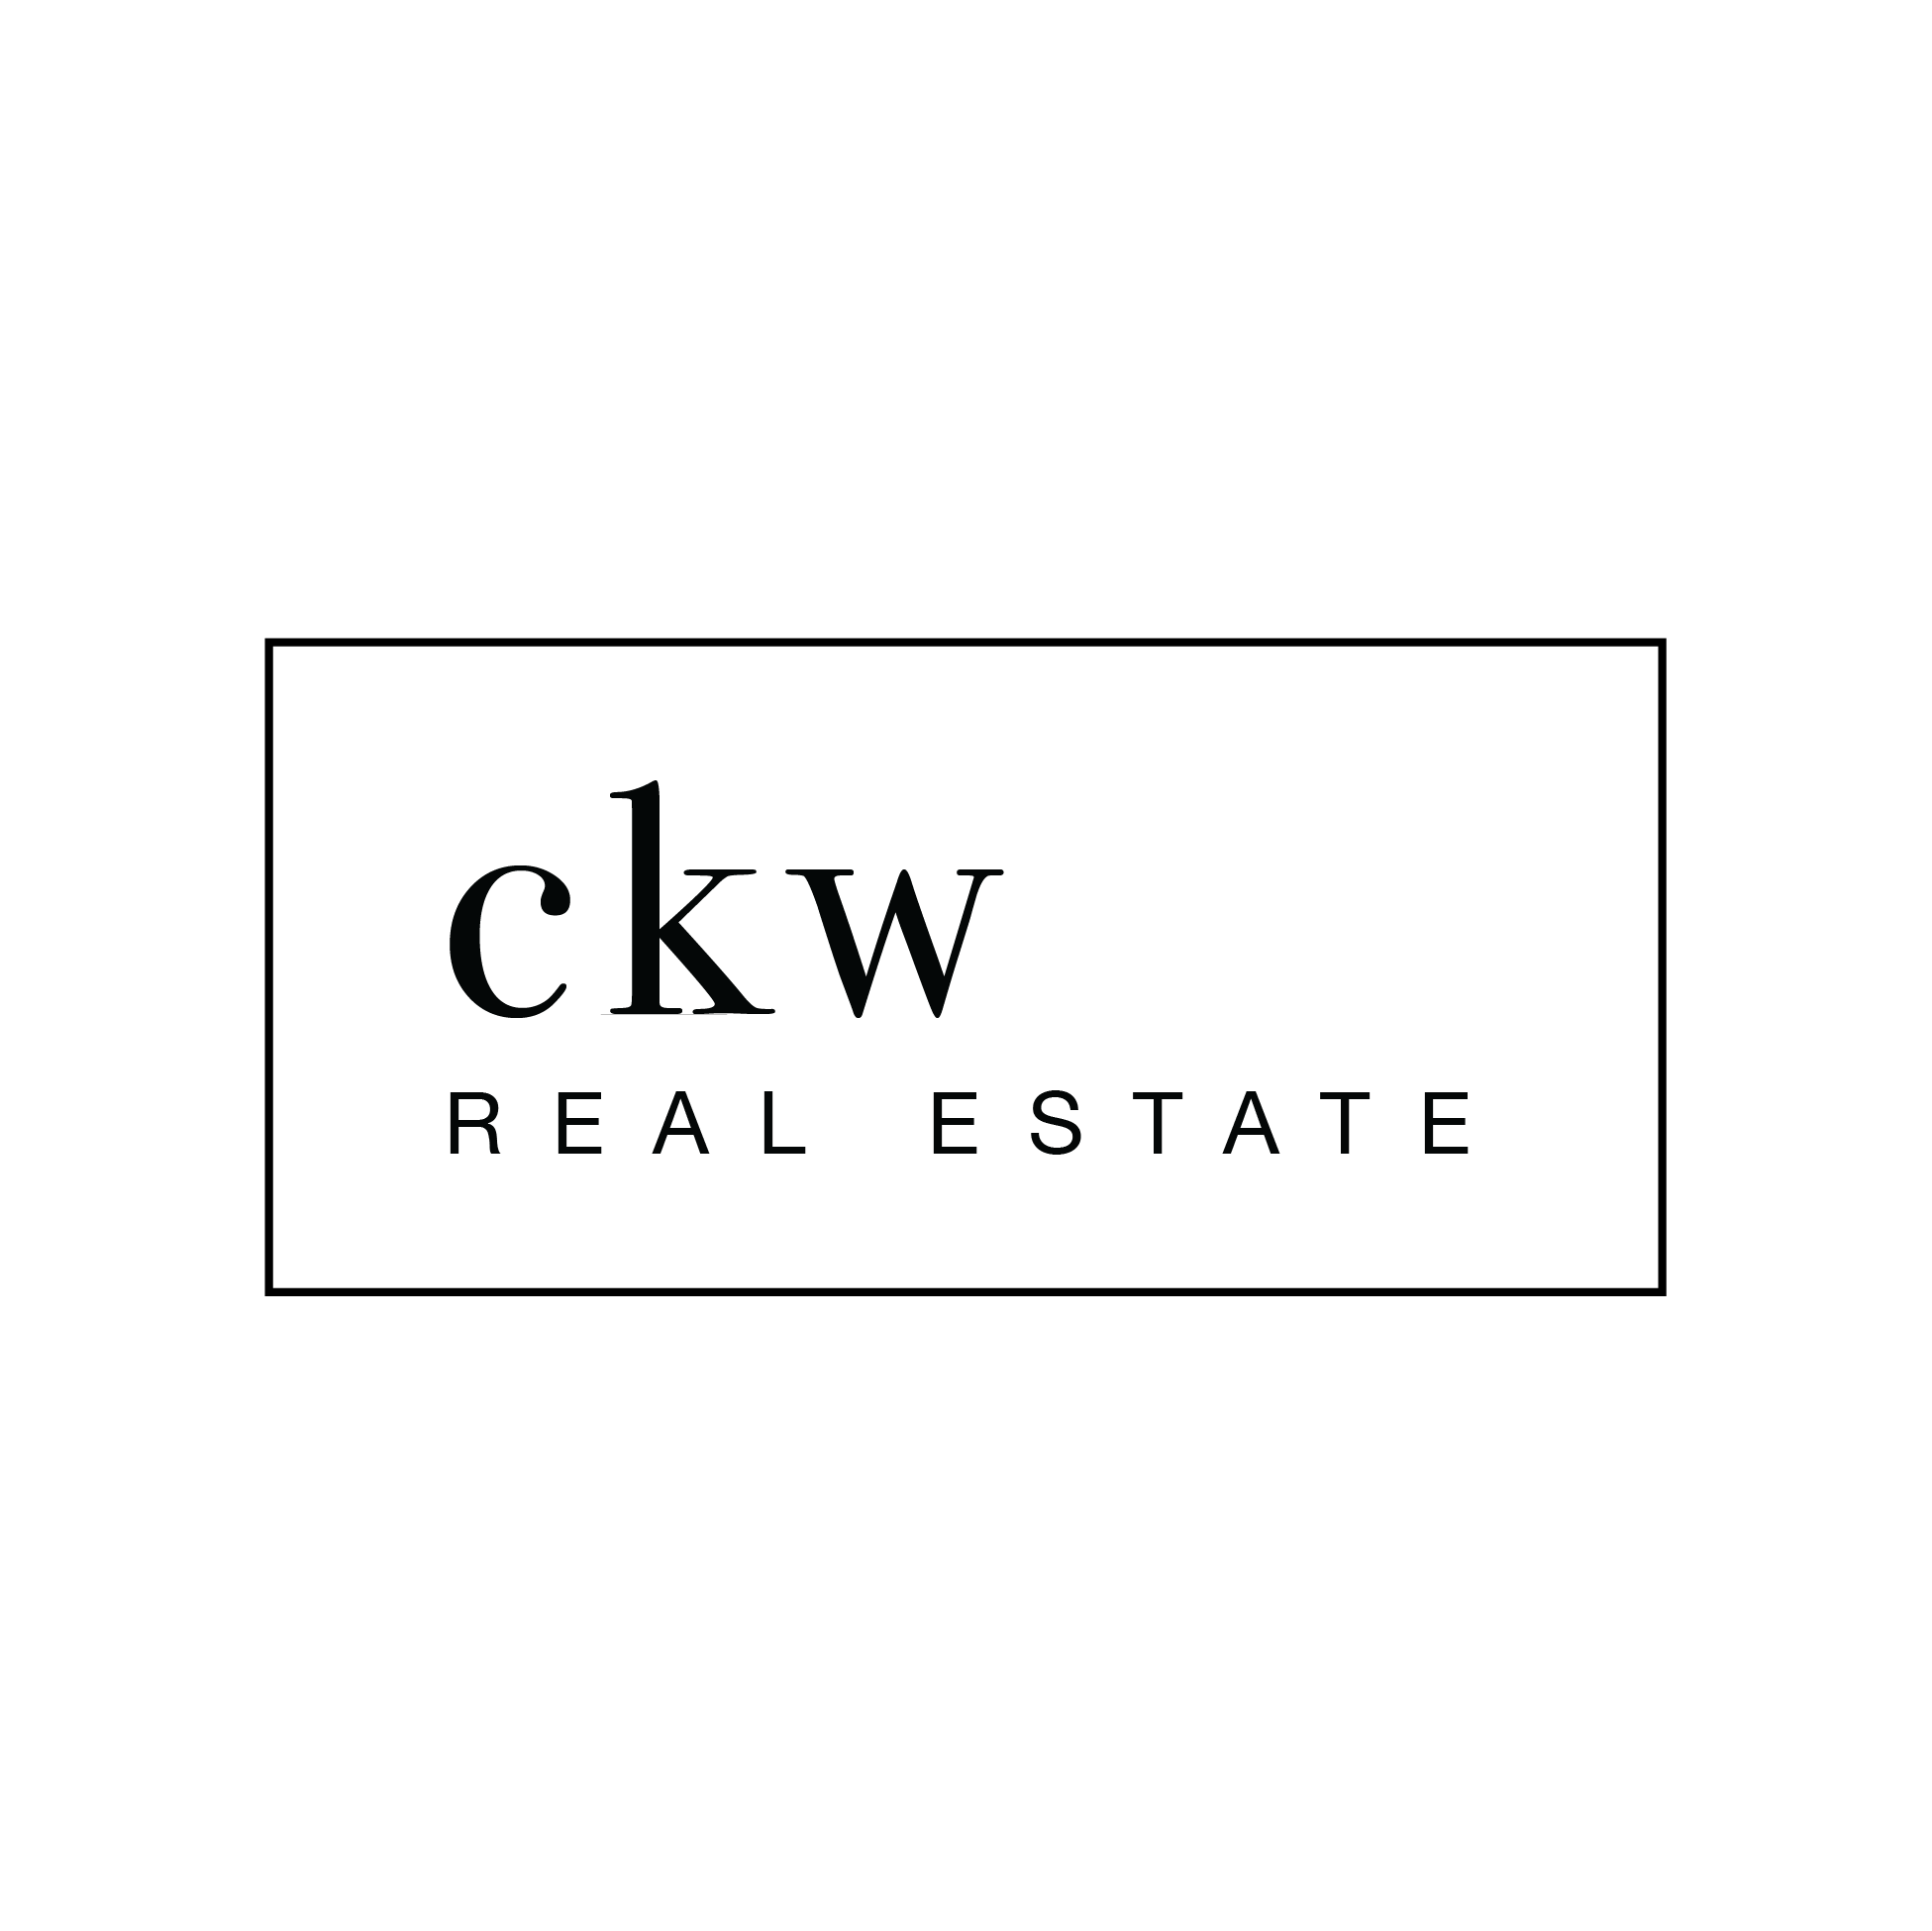 CKW REAL ESTATE